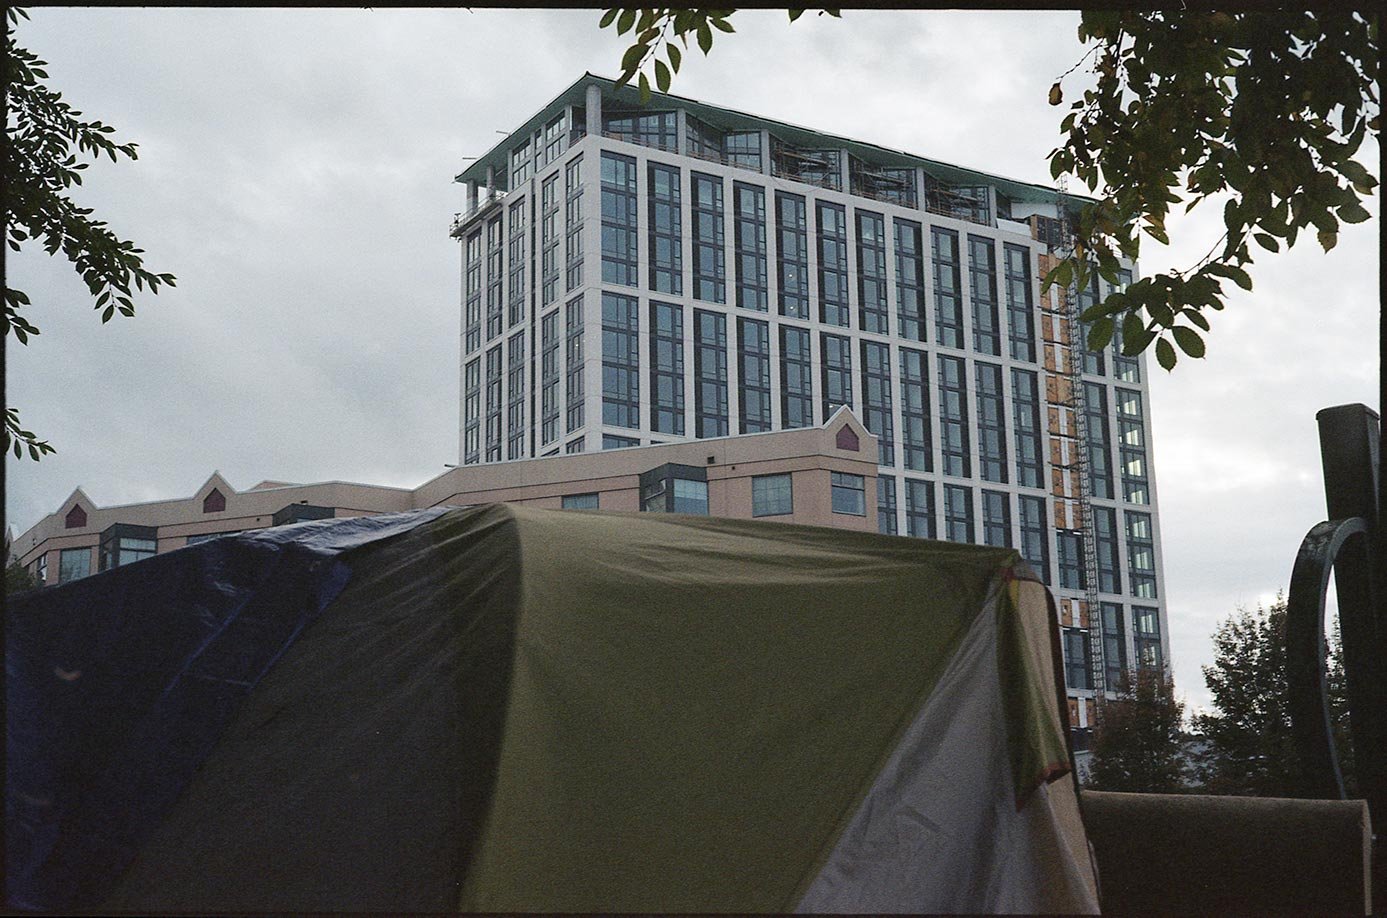 Tarp and Tent, W. Burside and 405, Portland OR, 2021